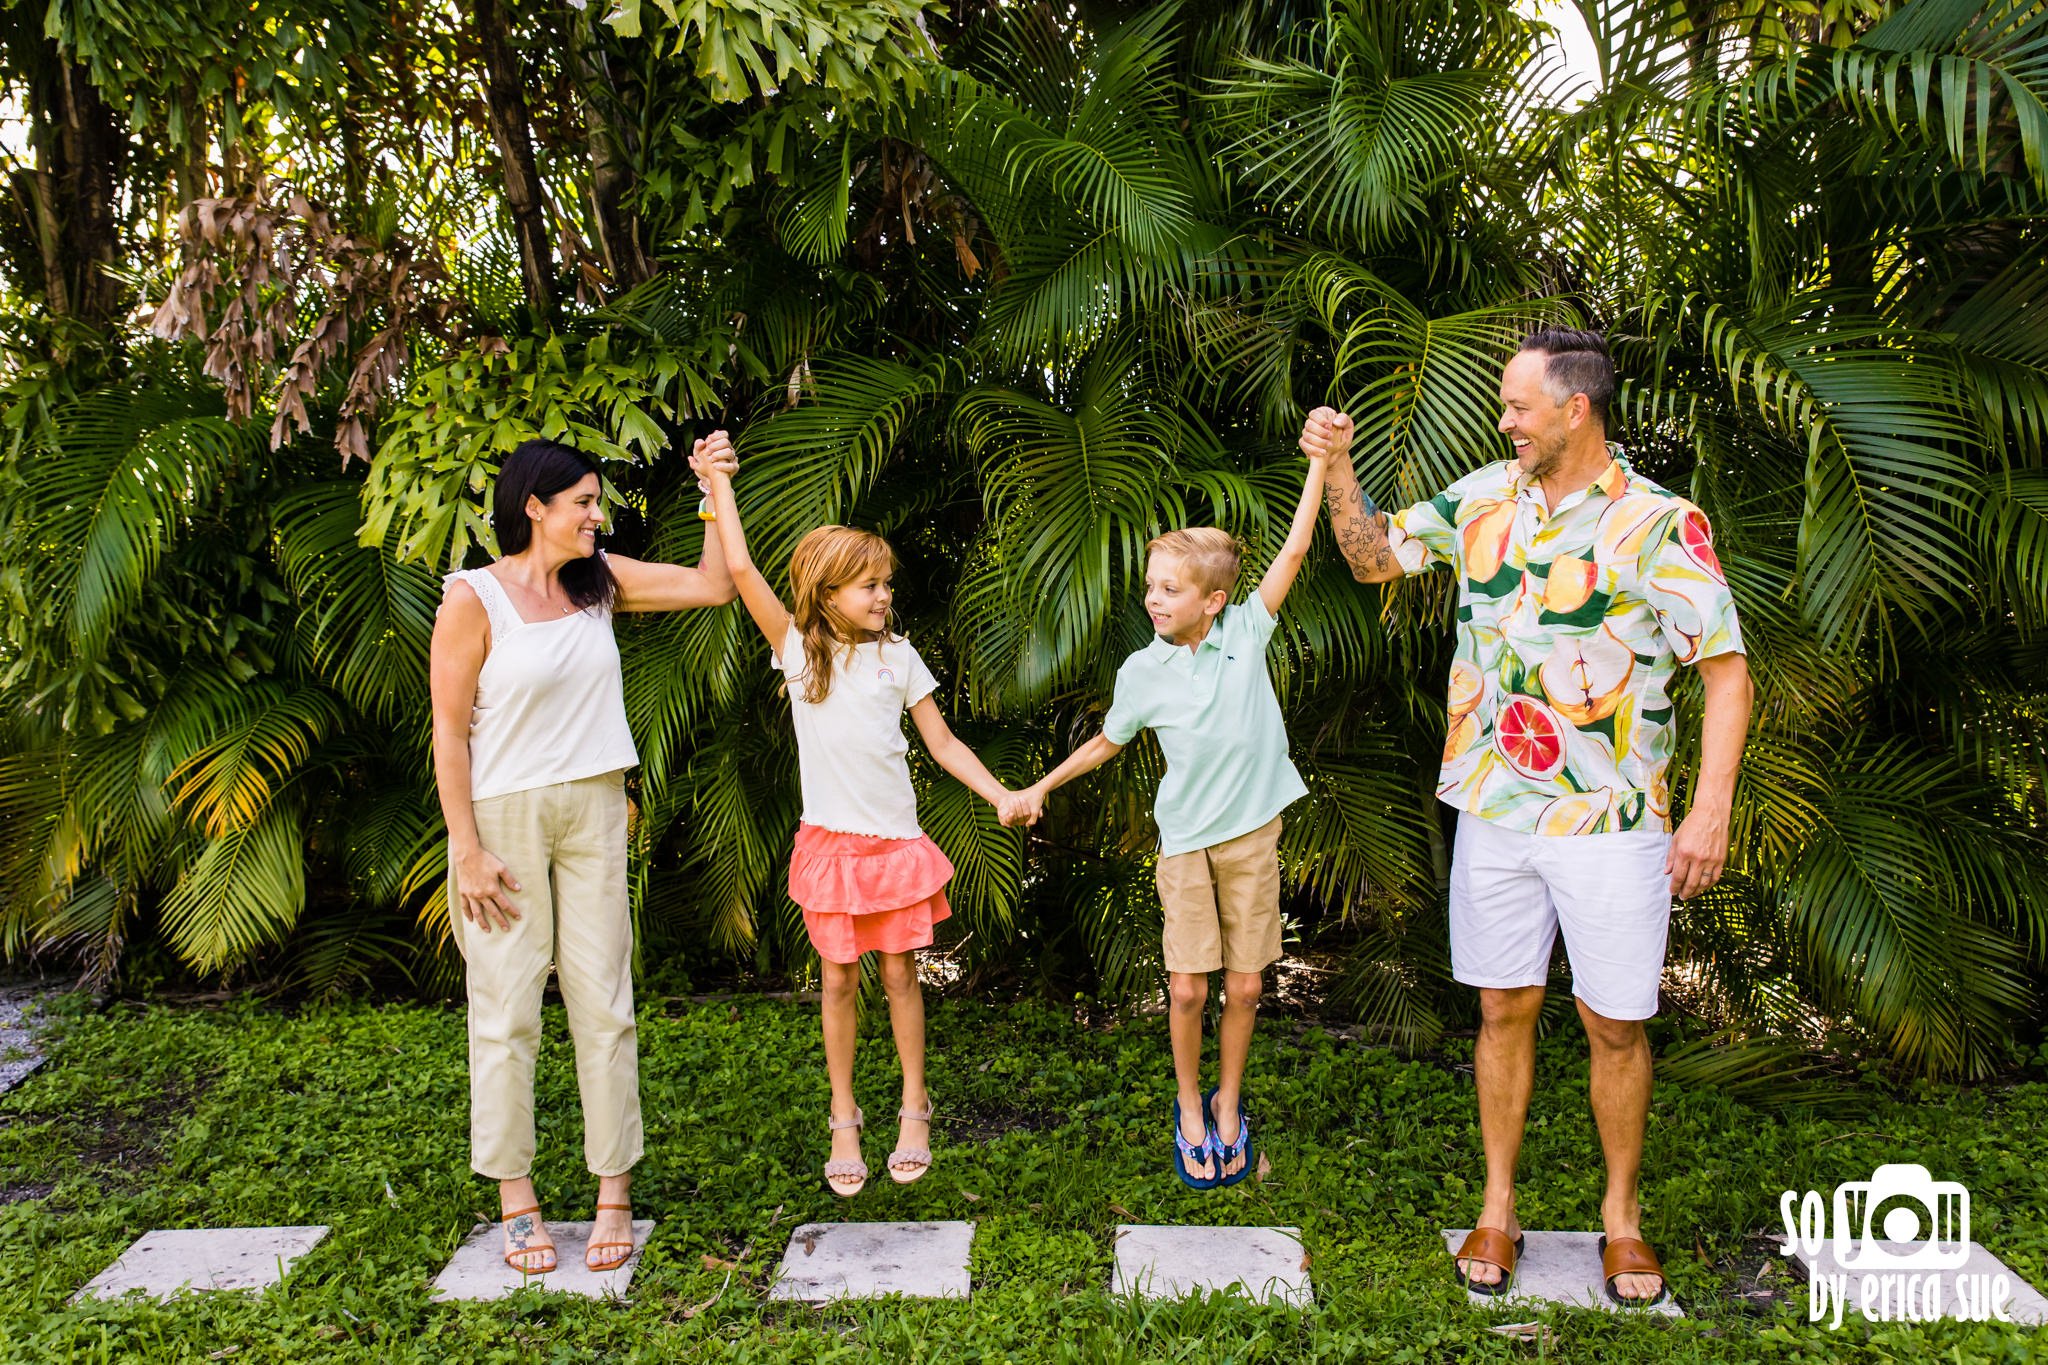 6-jury-fam-at-home-lifestyle-family-photographer-miami-fl-so-you-by-erica-sue-ES2_8040.jpg